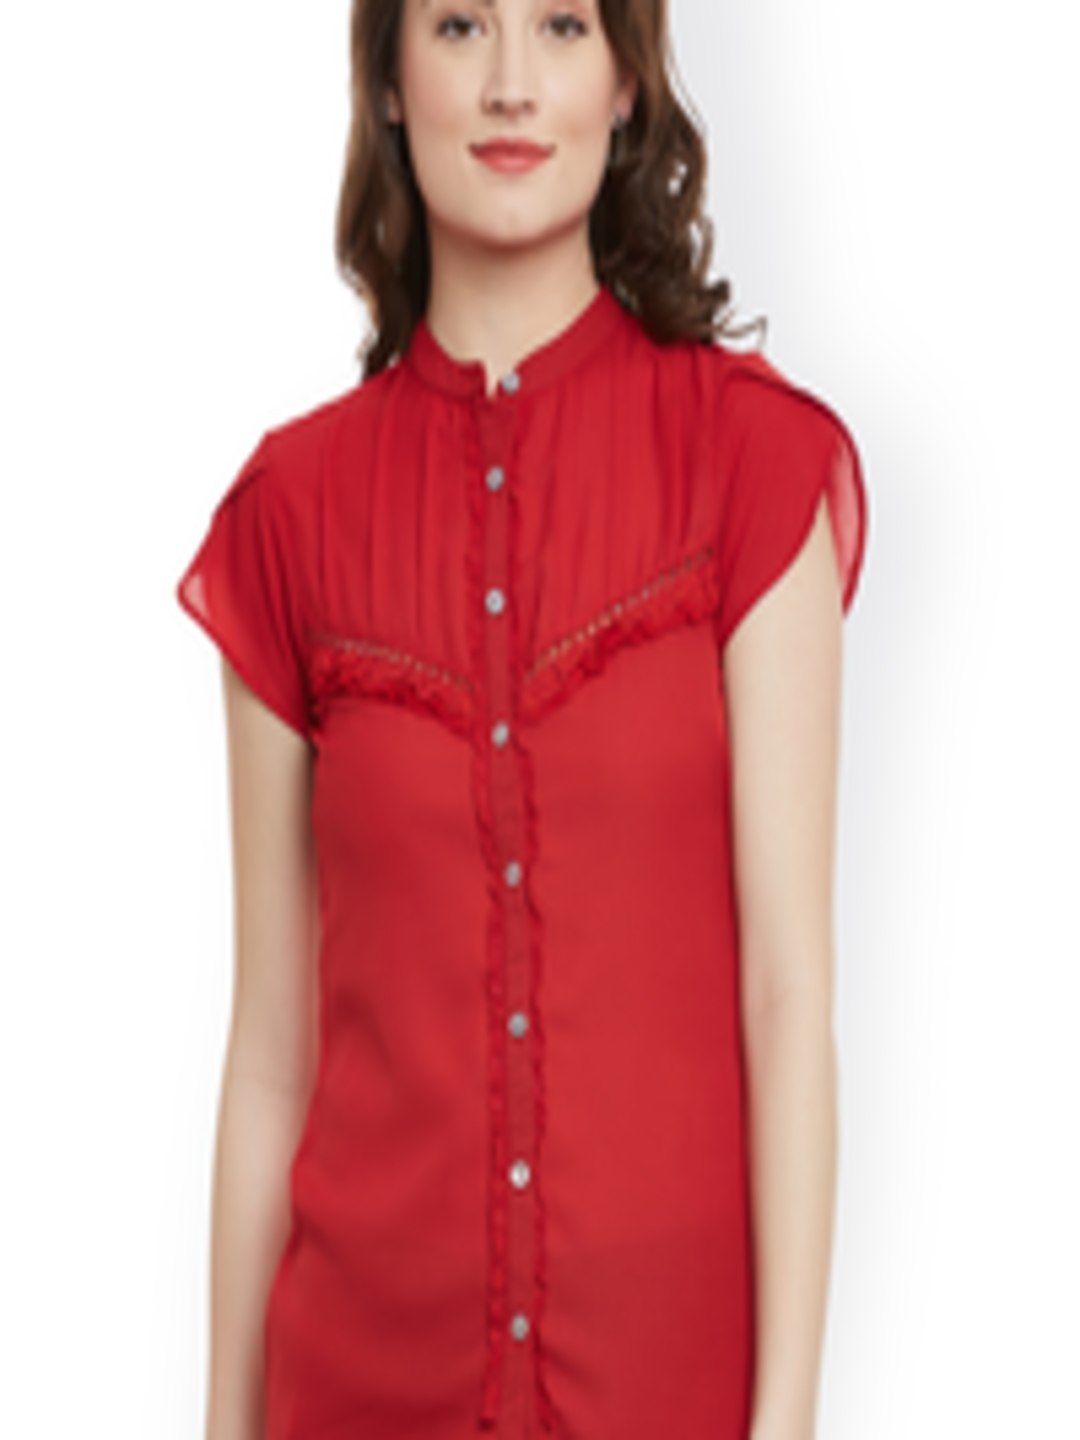 Buy The Vanca Red Shirt Style Top - Tops for Women 1857869 | Myntra